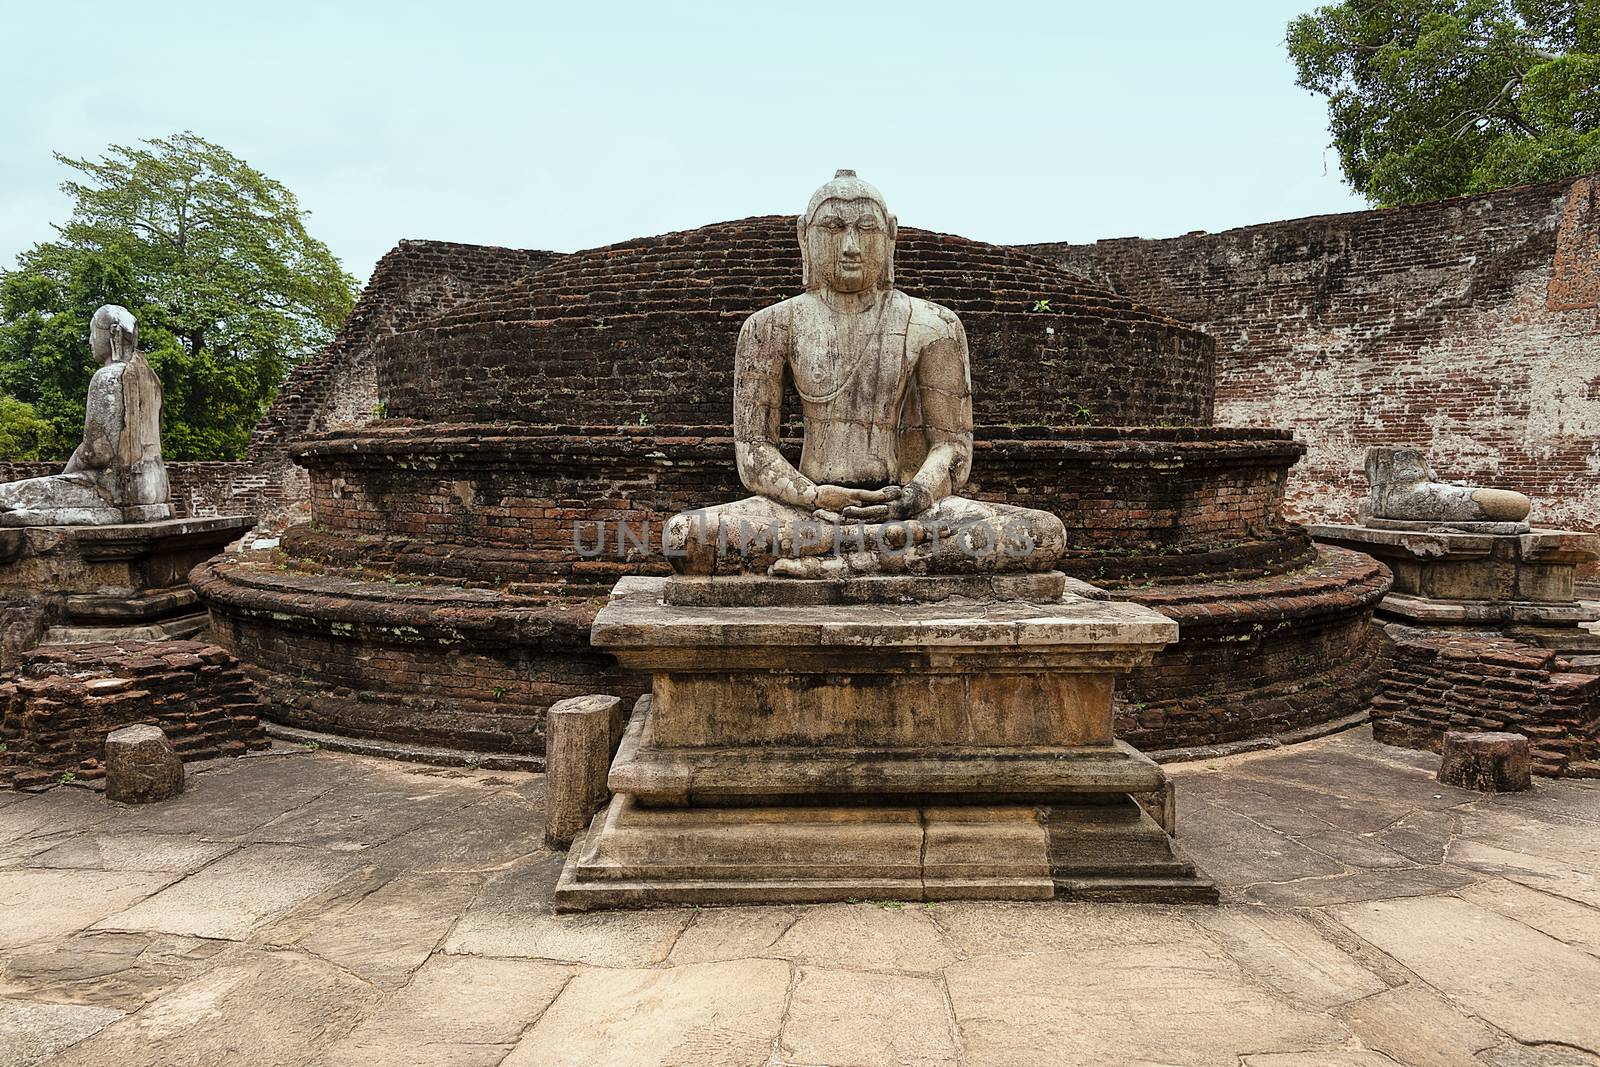 Polonnaruwa, Sri lanka, Sept 2015: The Quadrangle is a raised site with many important monuments some of which are temples of the tooth of Buddha.